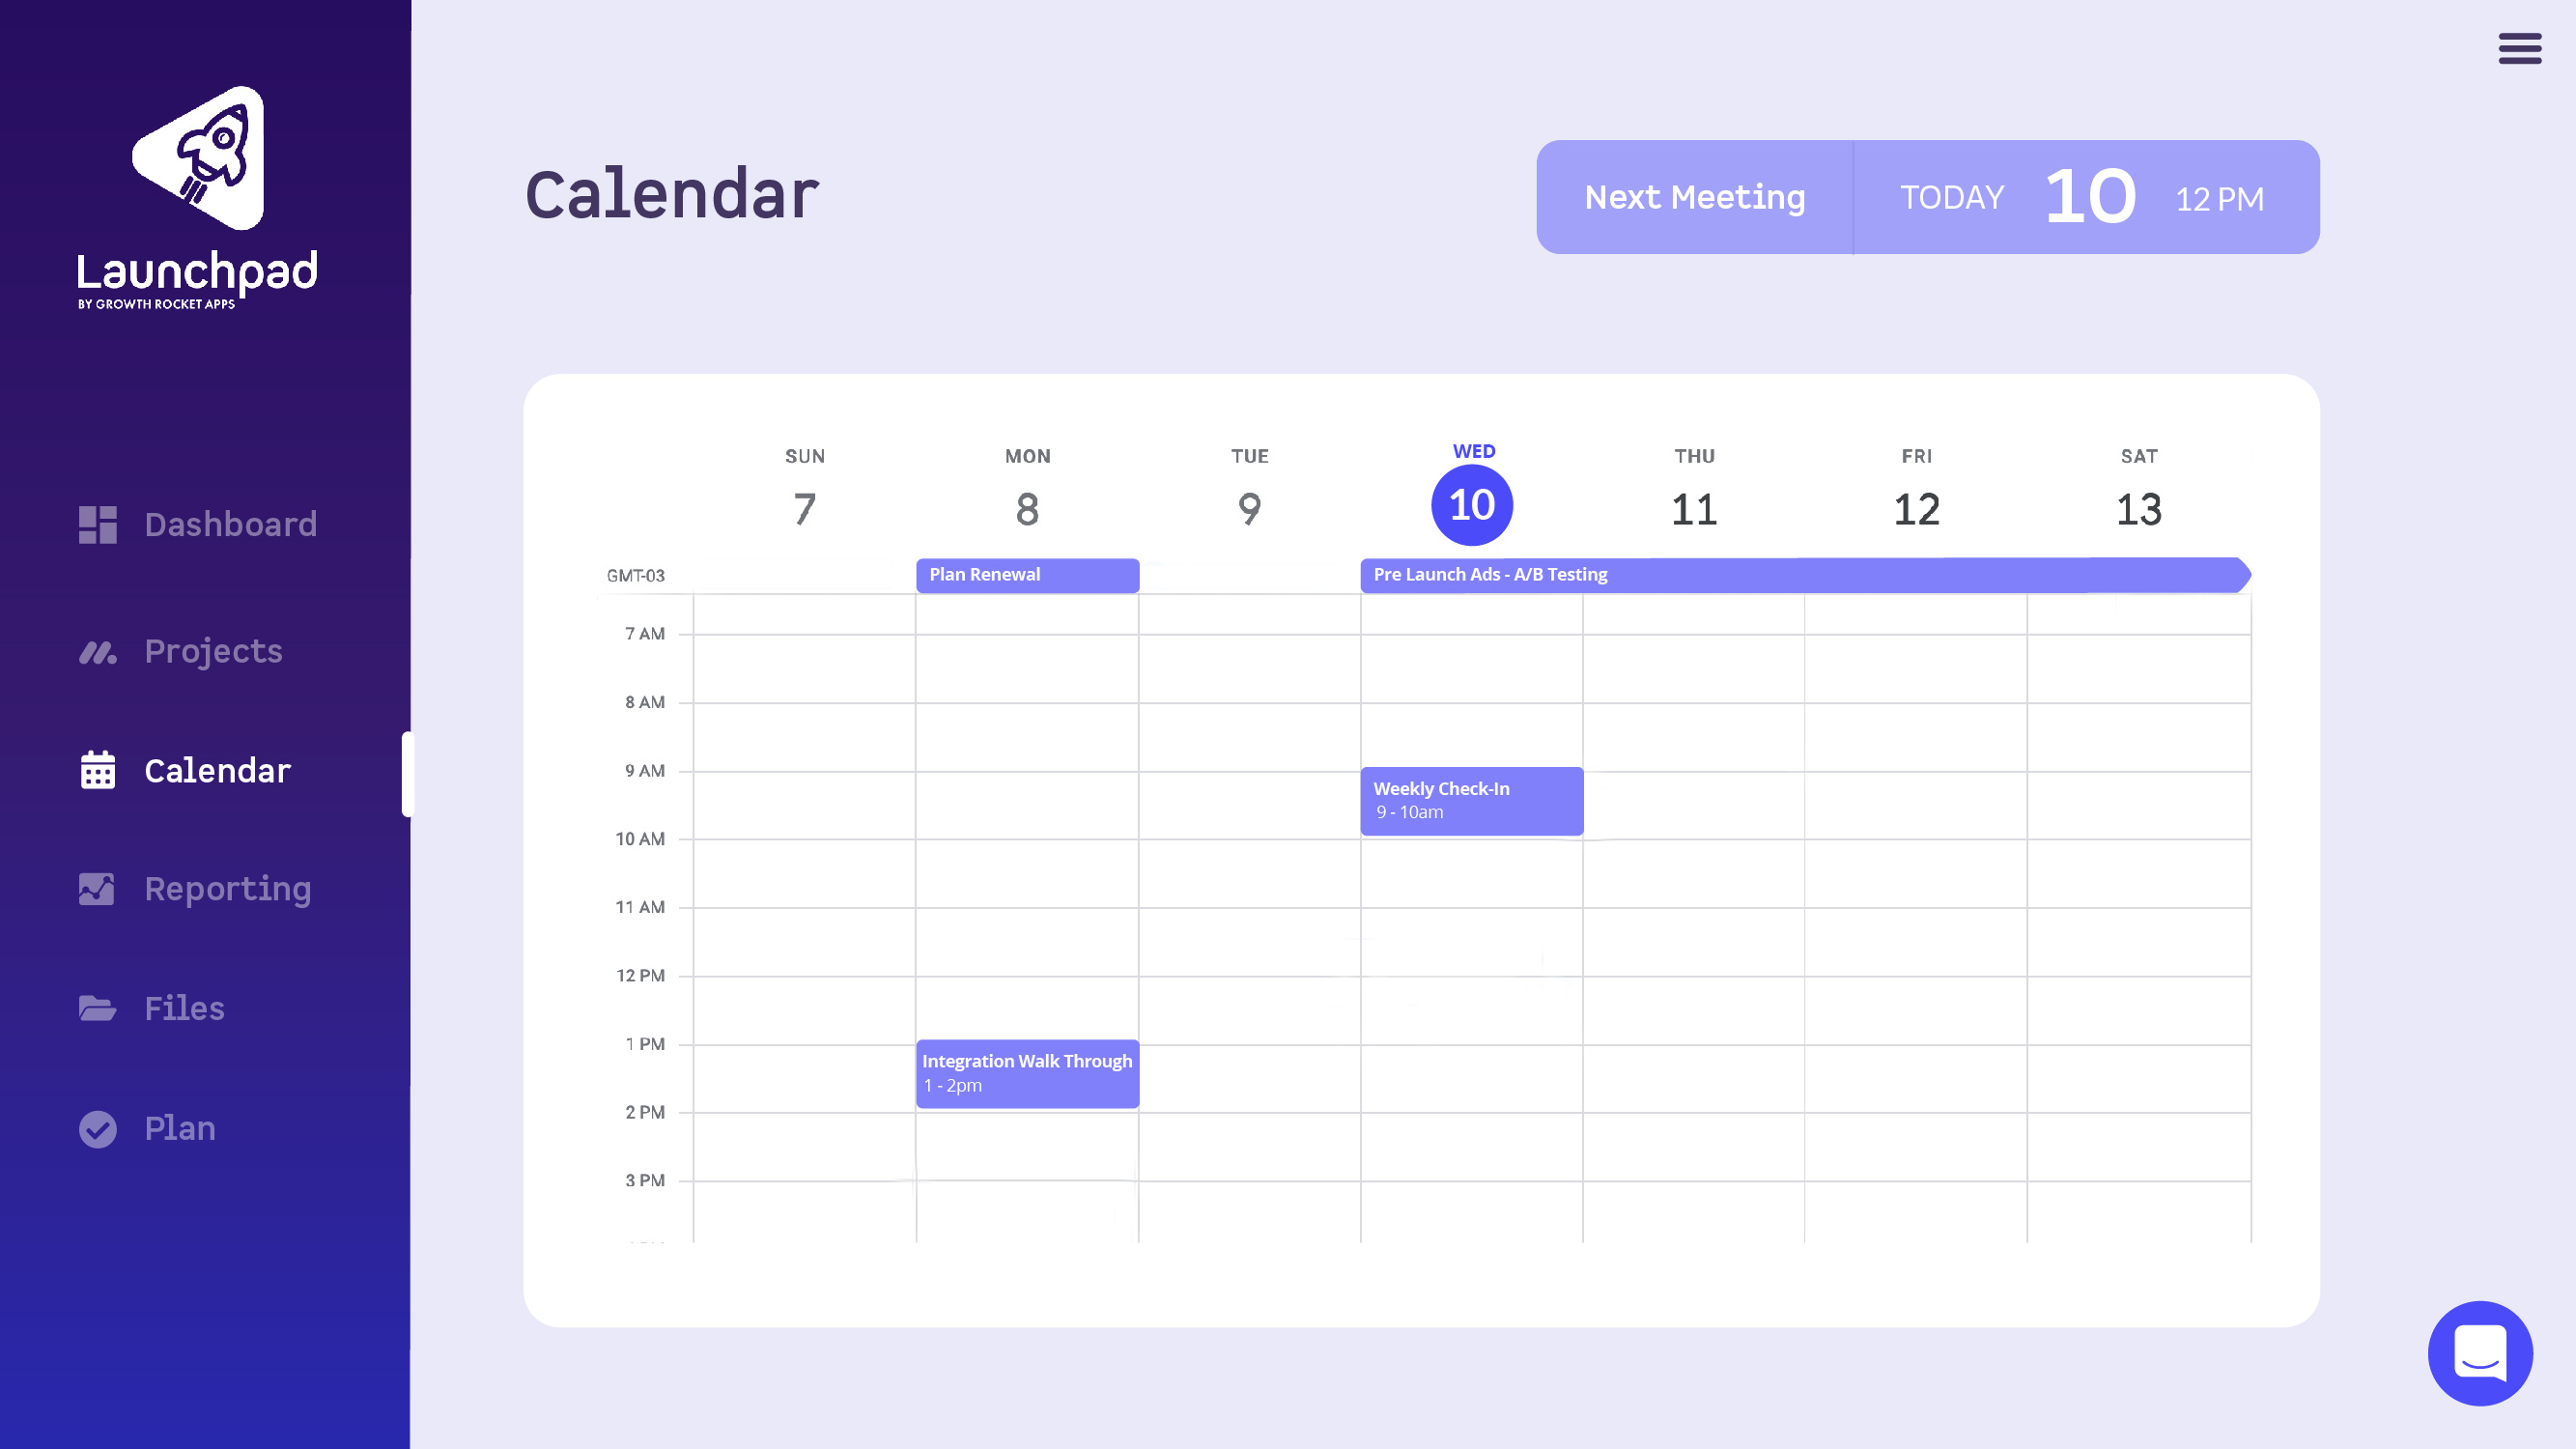 Calendar: keep marketing and product efforts aligned